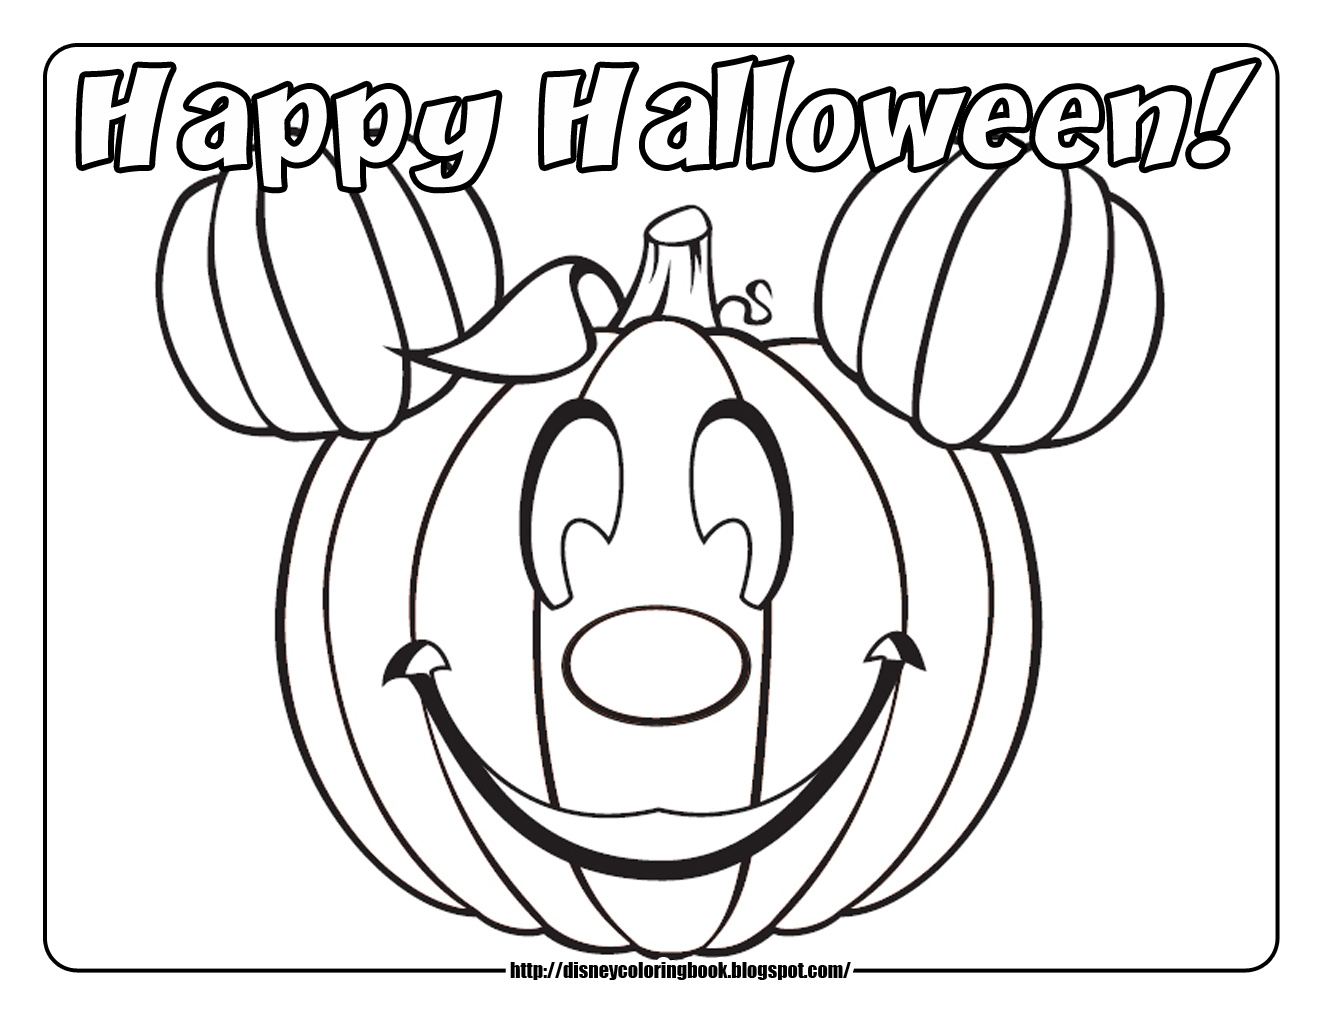 Disney Coloring Pages And Sheets For Kids Mickey And Friends Halloween 